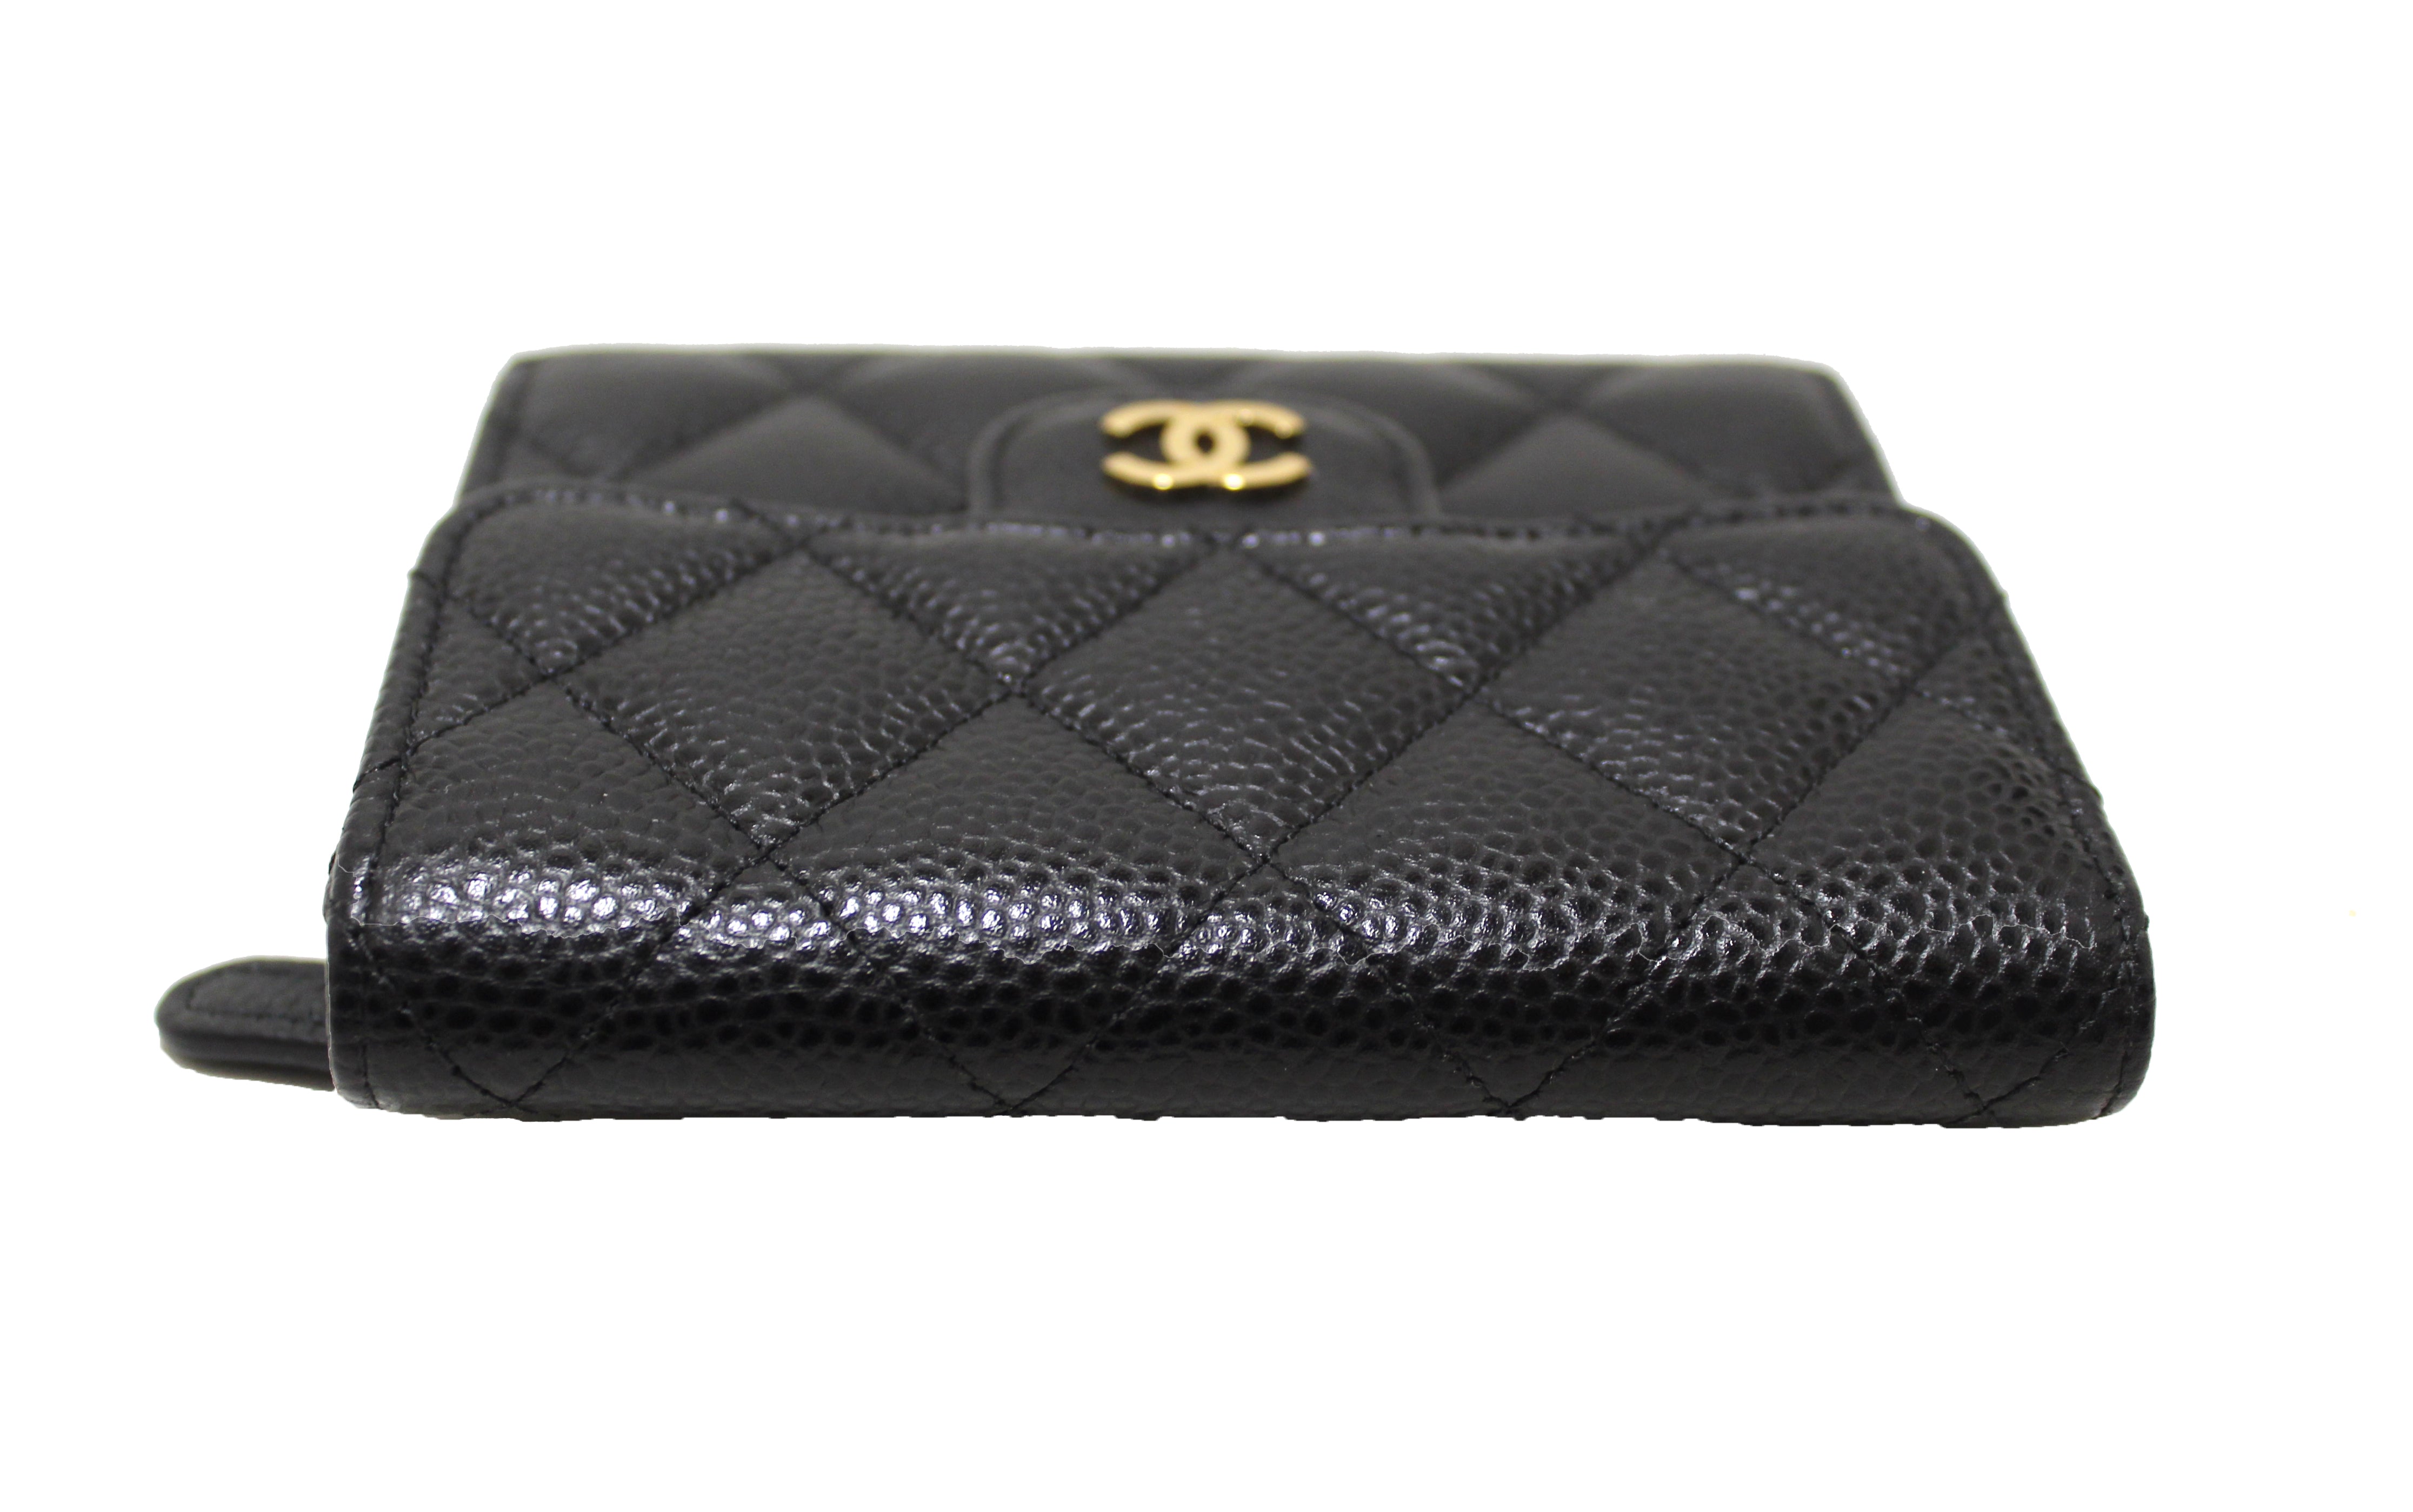 Authentic Chanel Black Quilted Caviar Leather Classic Small Flap Wallet